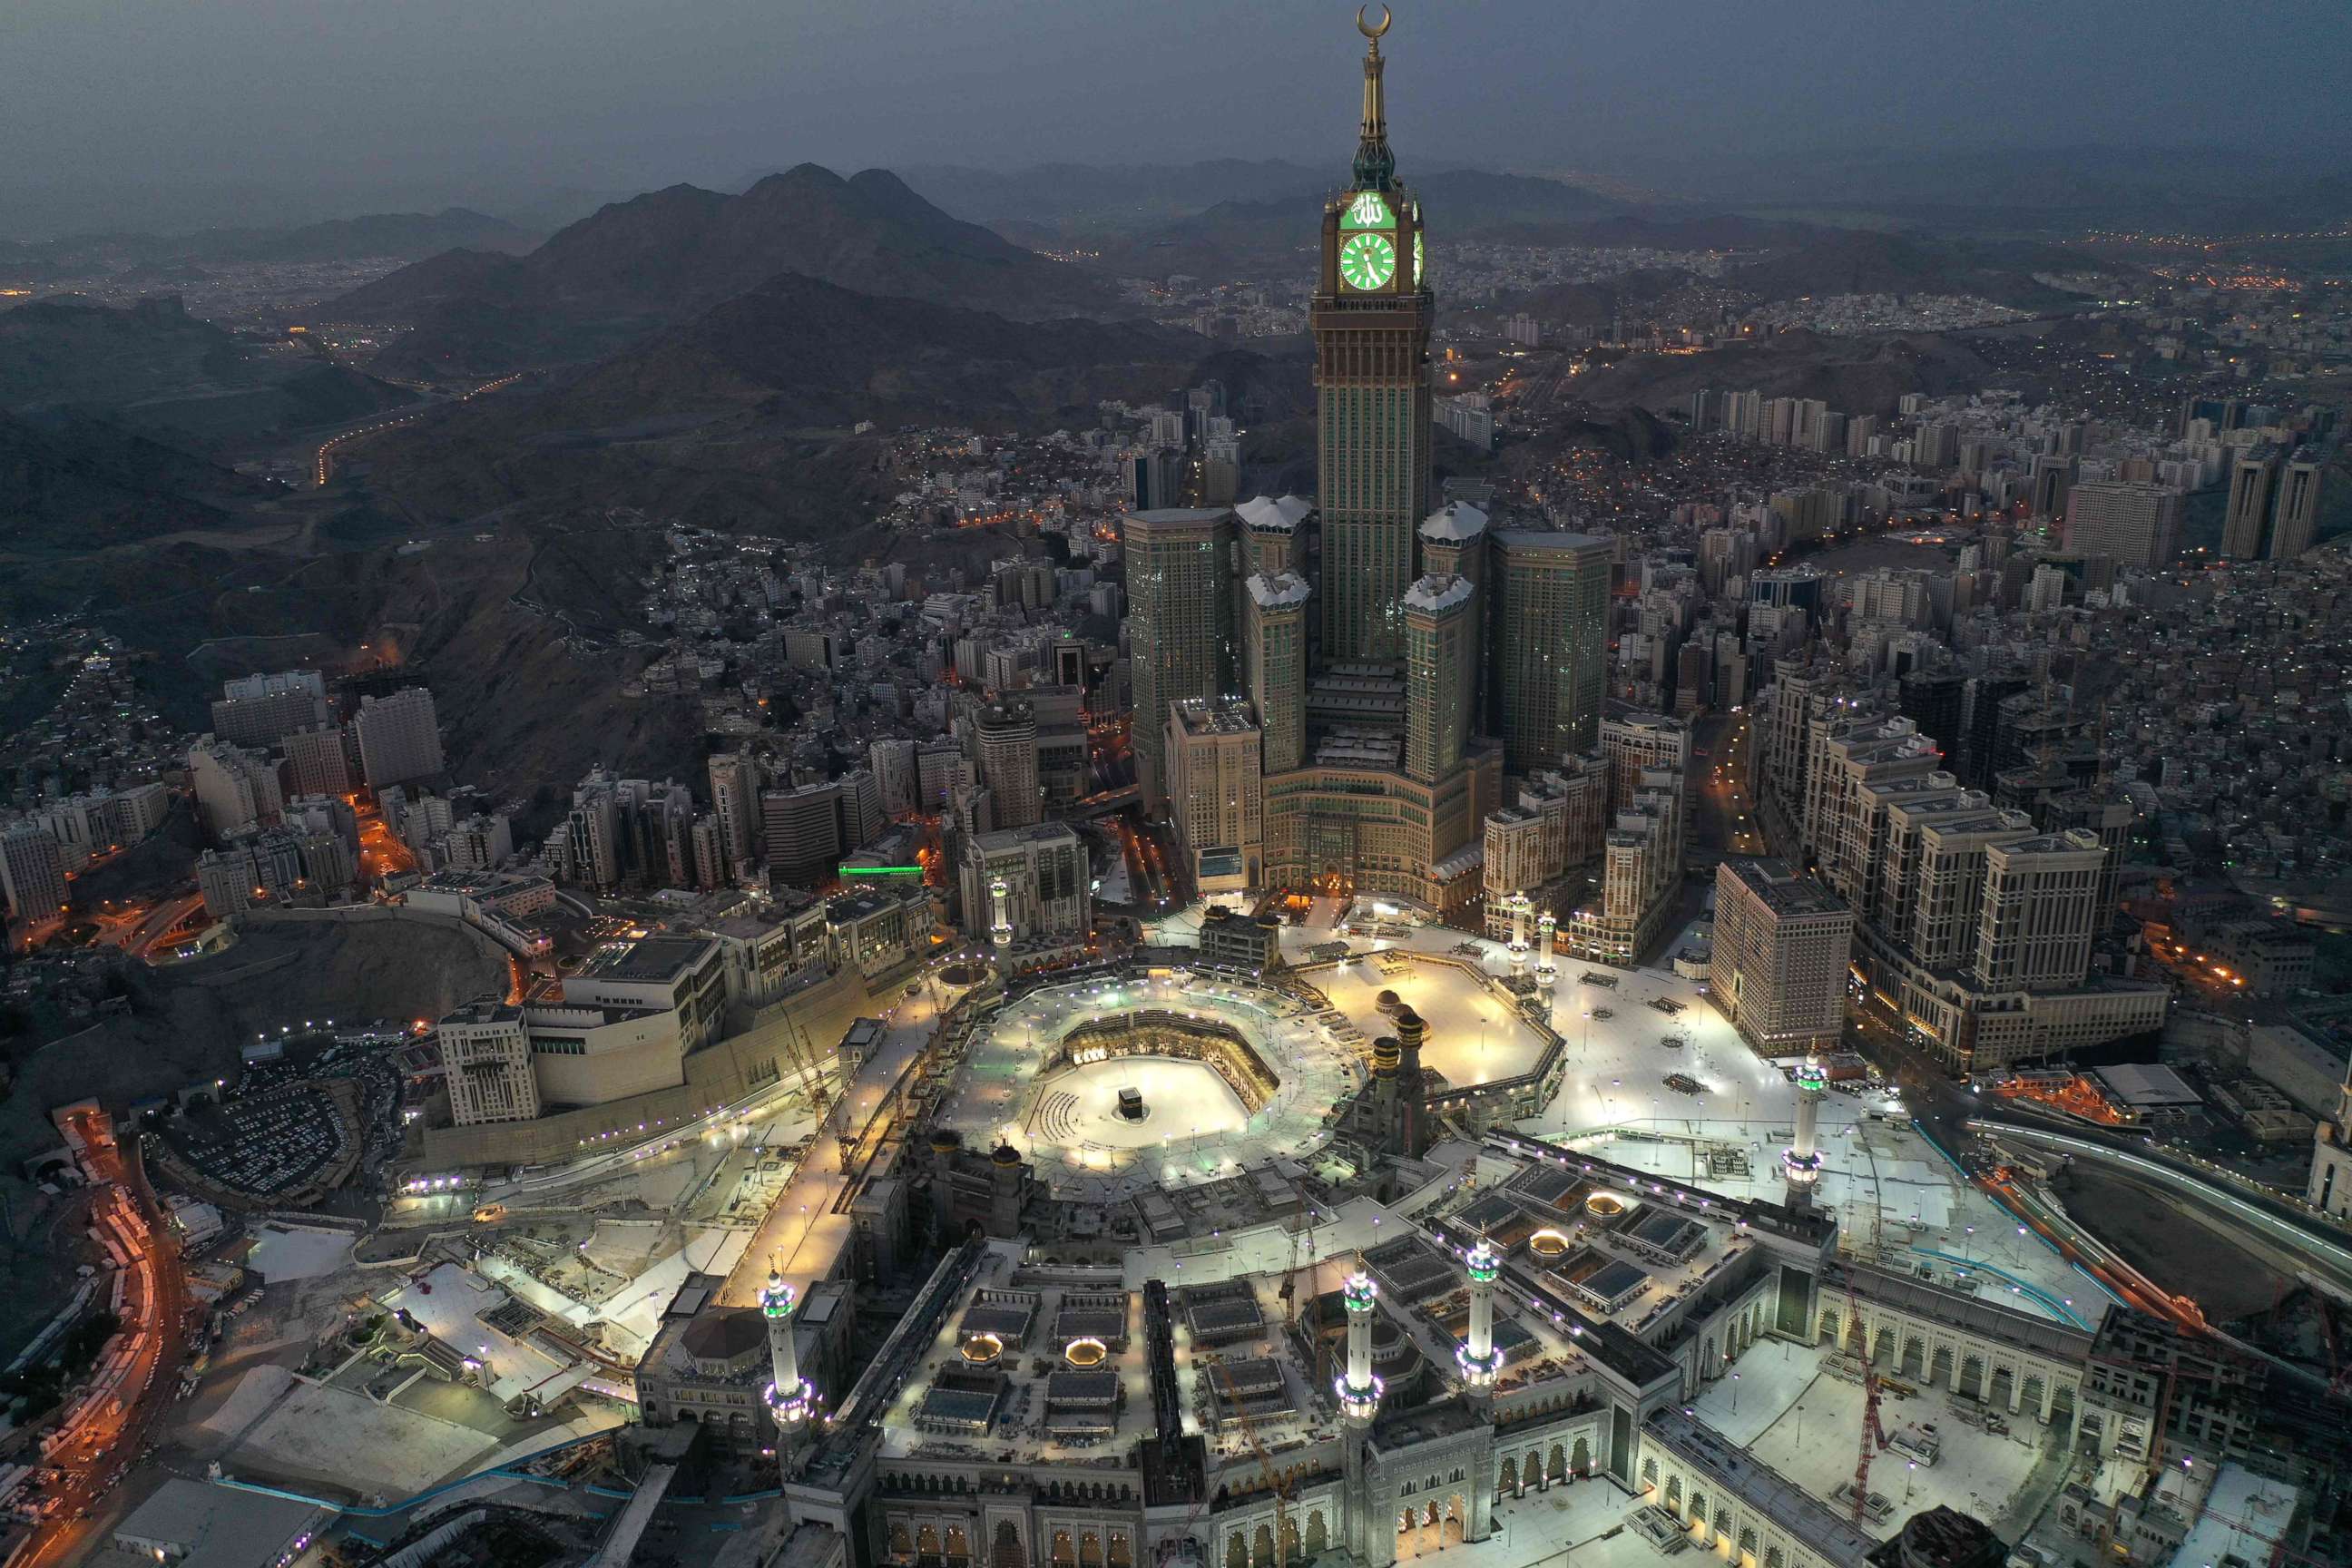 An aerial view of Saudi Arabia's holy city of Mecca, with the Abraj al-Bait Mecca Royal Clock Tower overlooking the Grand Mosque and Kaaba in the center, May 24, 2020.